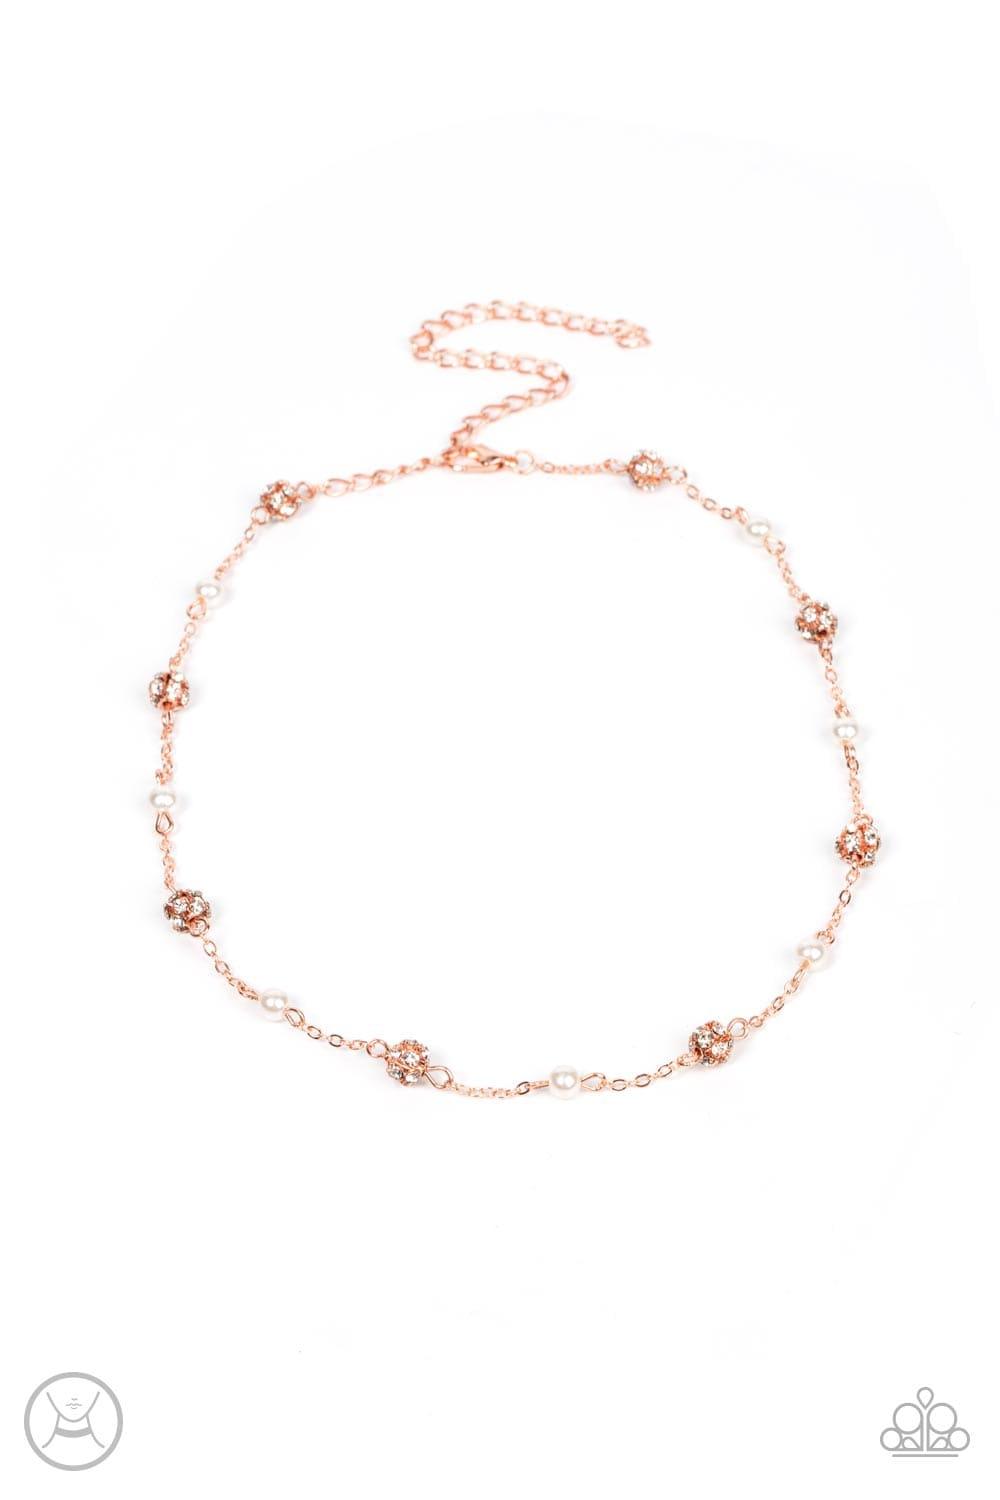 Paparazzi Accessories - Rumored Romance - Copper Choker Necklace - Bling by JessieK